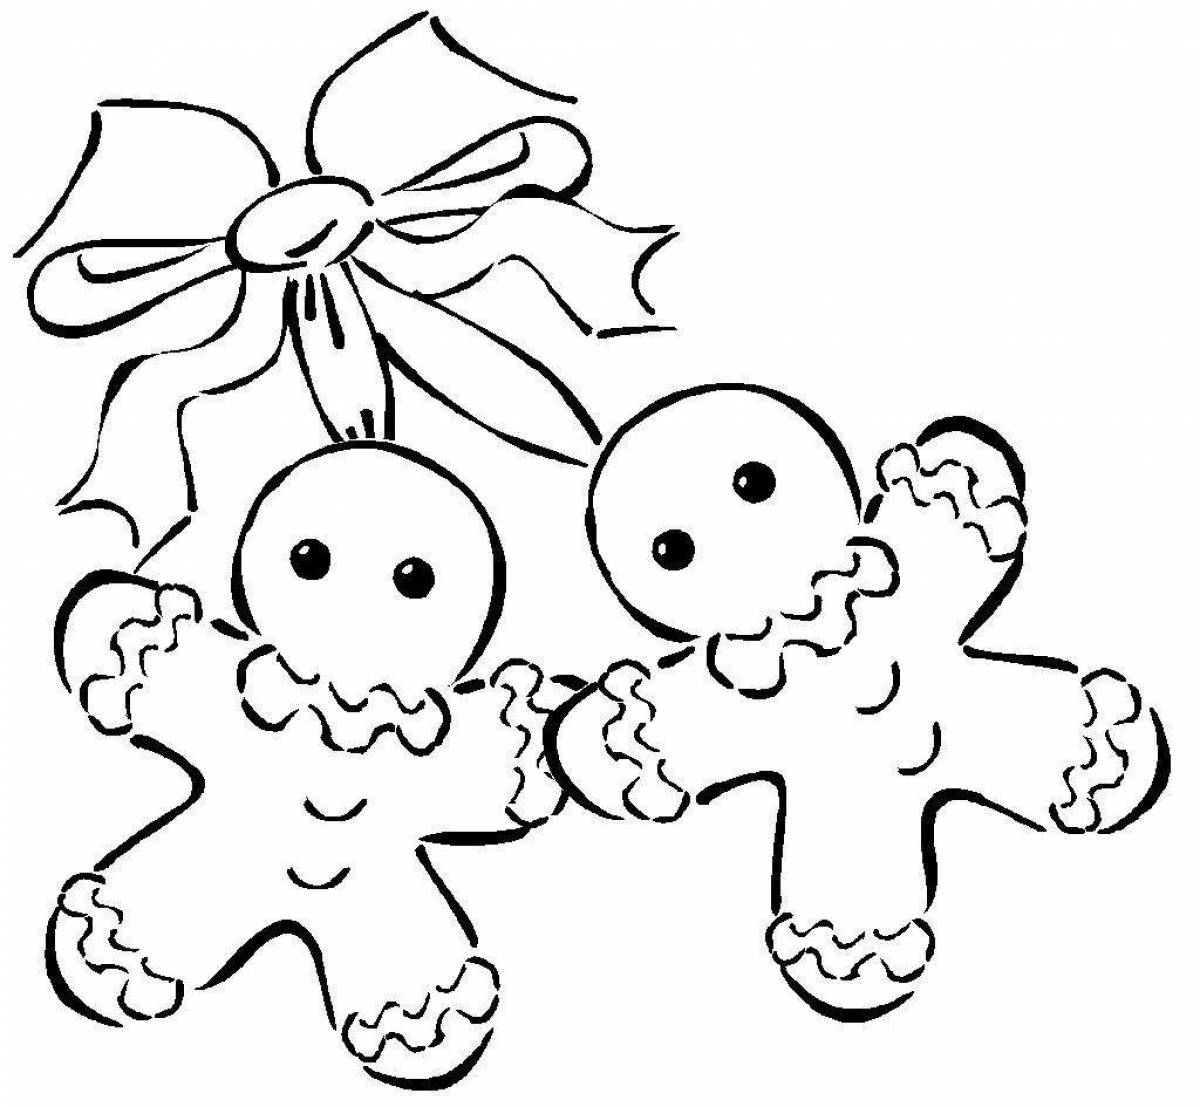 Adorable Christmas cookie coloring book